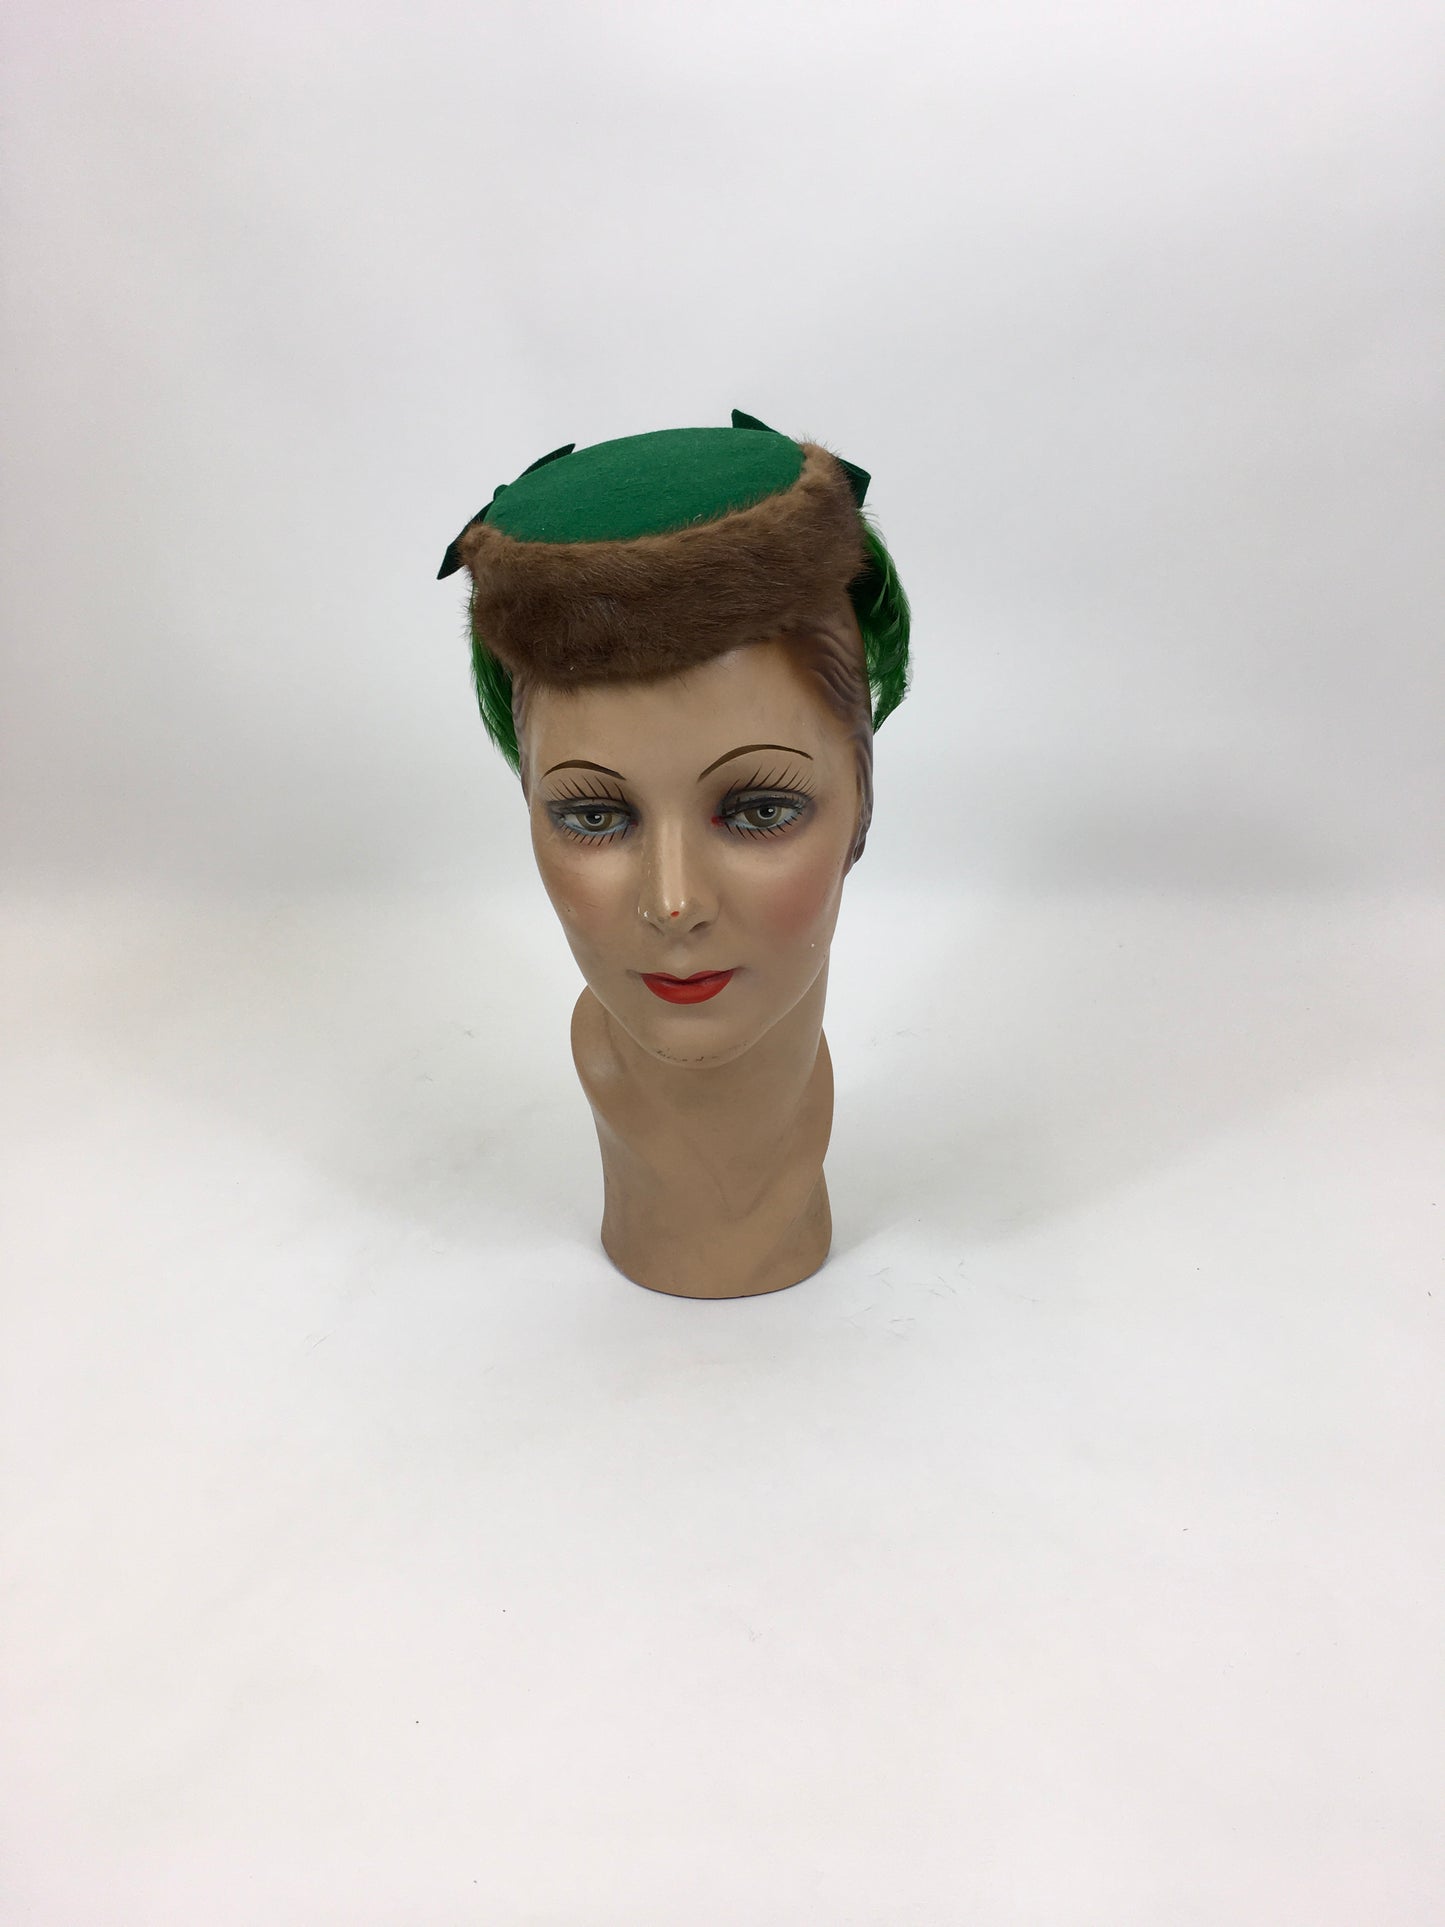 Original 1940's Stunning Head Piece - In Bottle Green Felt with Bow Trims, Fur Trim & Feather Backplate